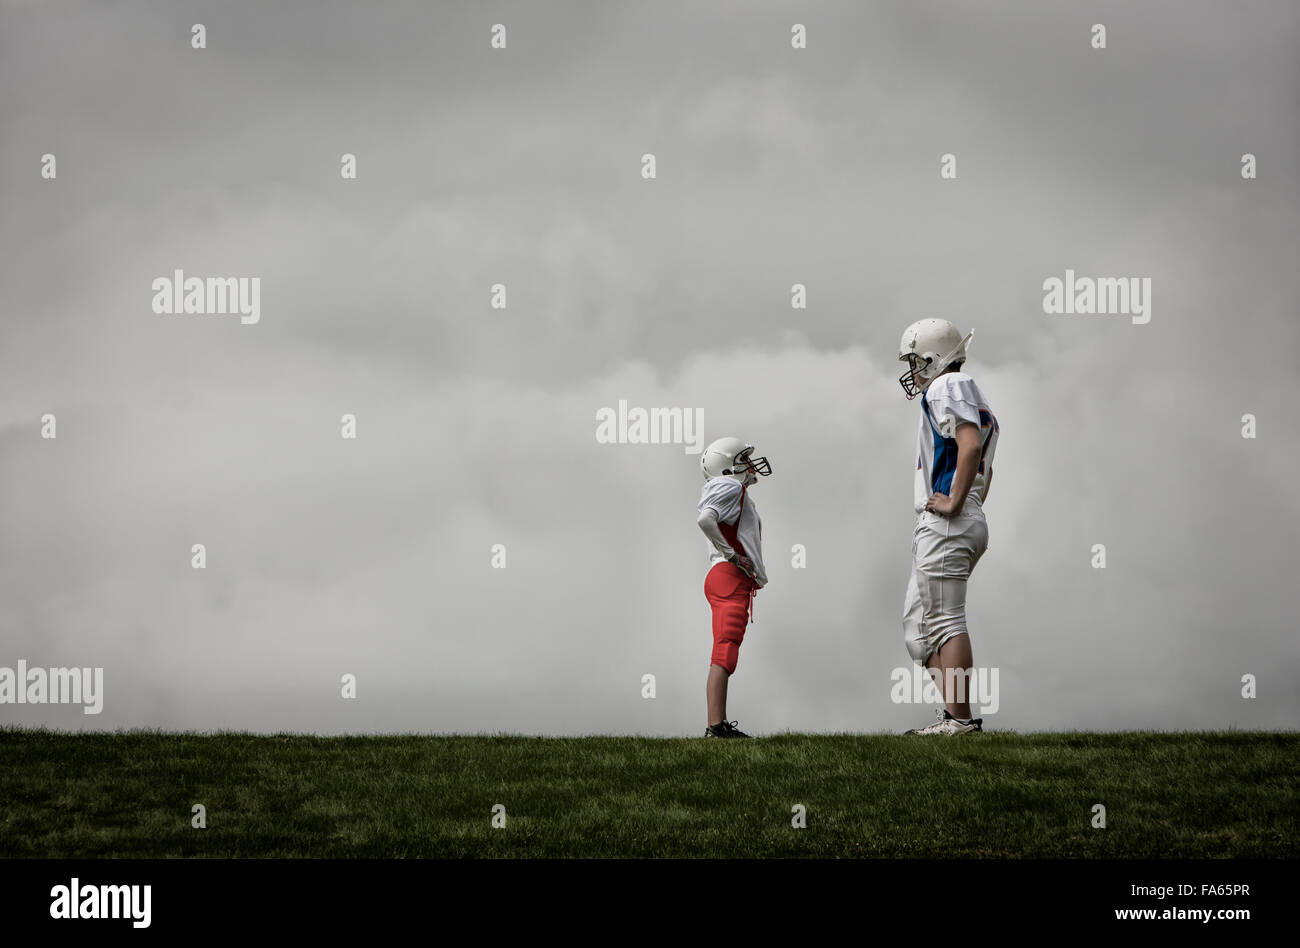 Two people facing each other, one very tall football player, and one much shorter person looking up, hands on hips. Stock Photo